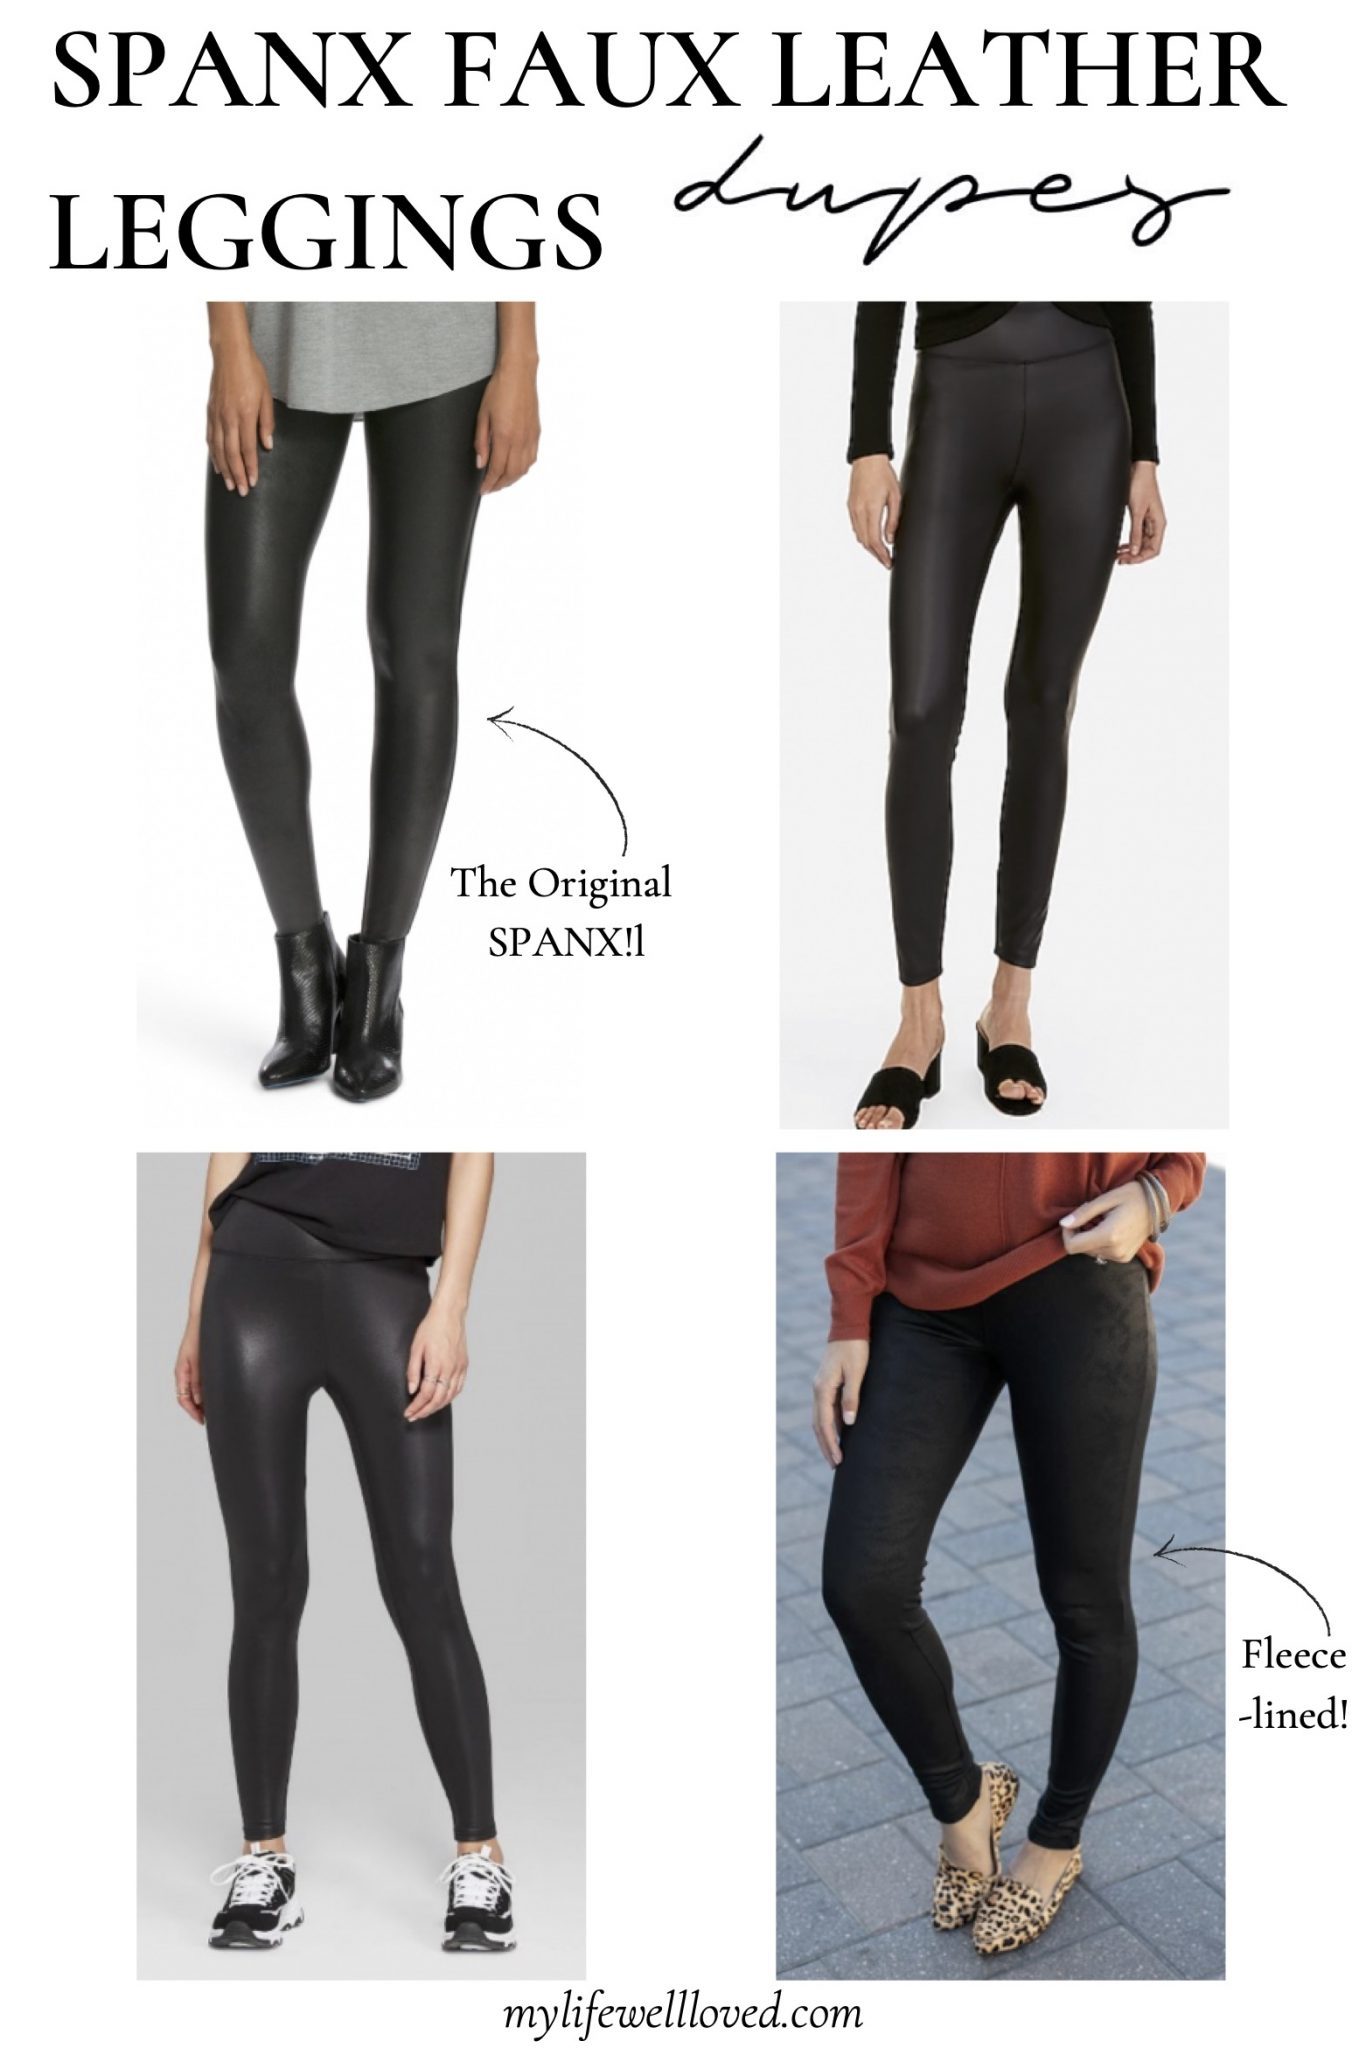 We tried Spanx's faux-leather leggings and they were equal parts